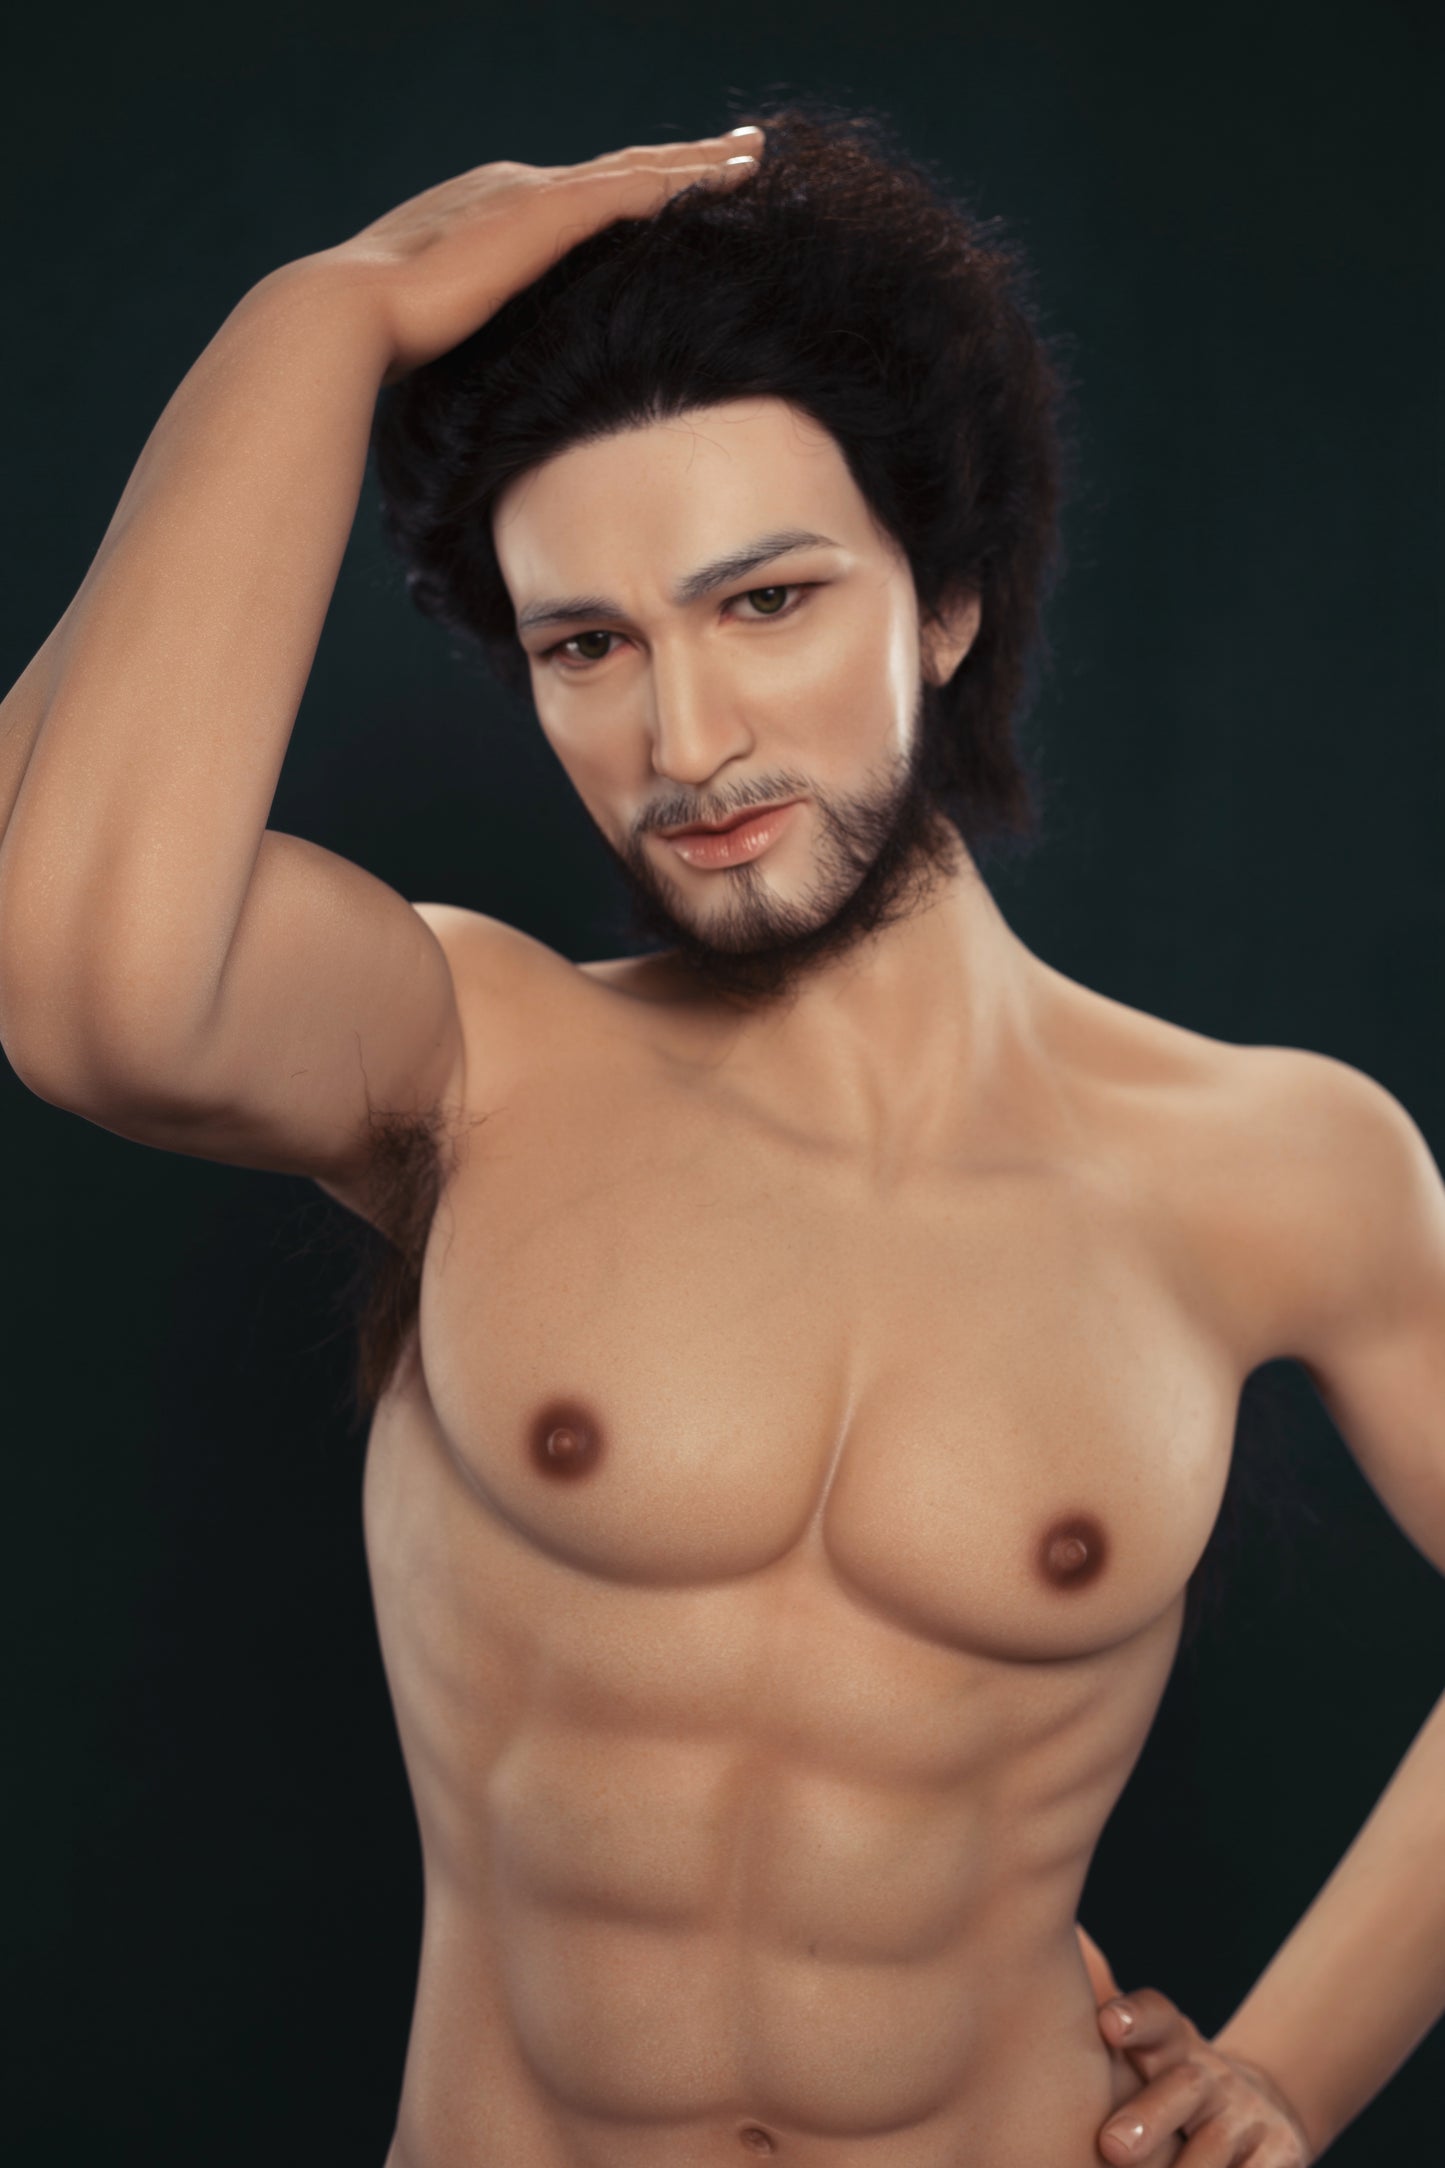 160cm Adult love doll Realistic male sex doll gay doll silicone guy doll for sex